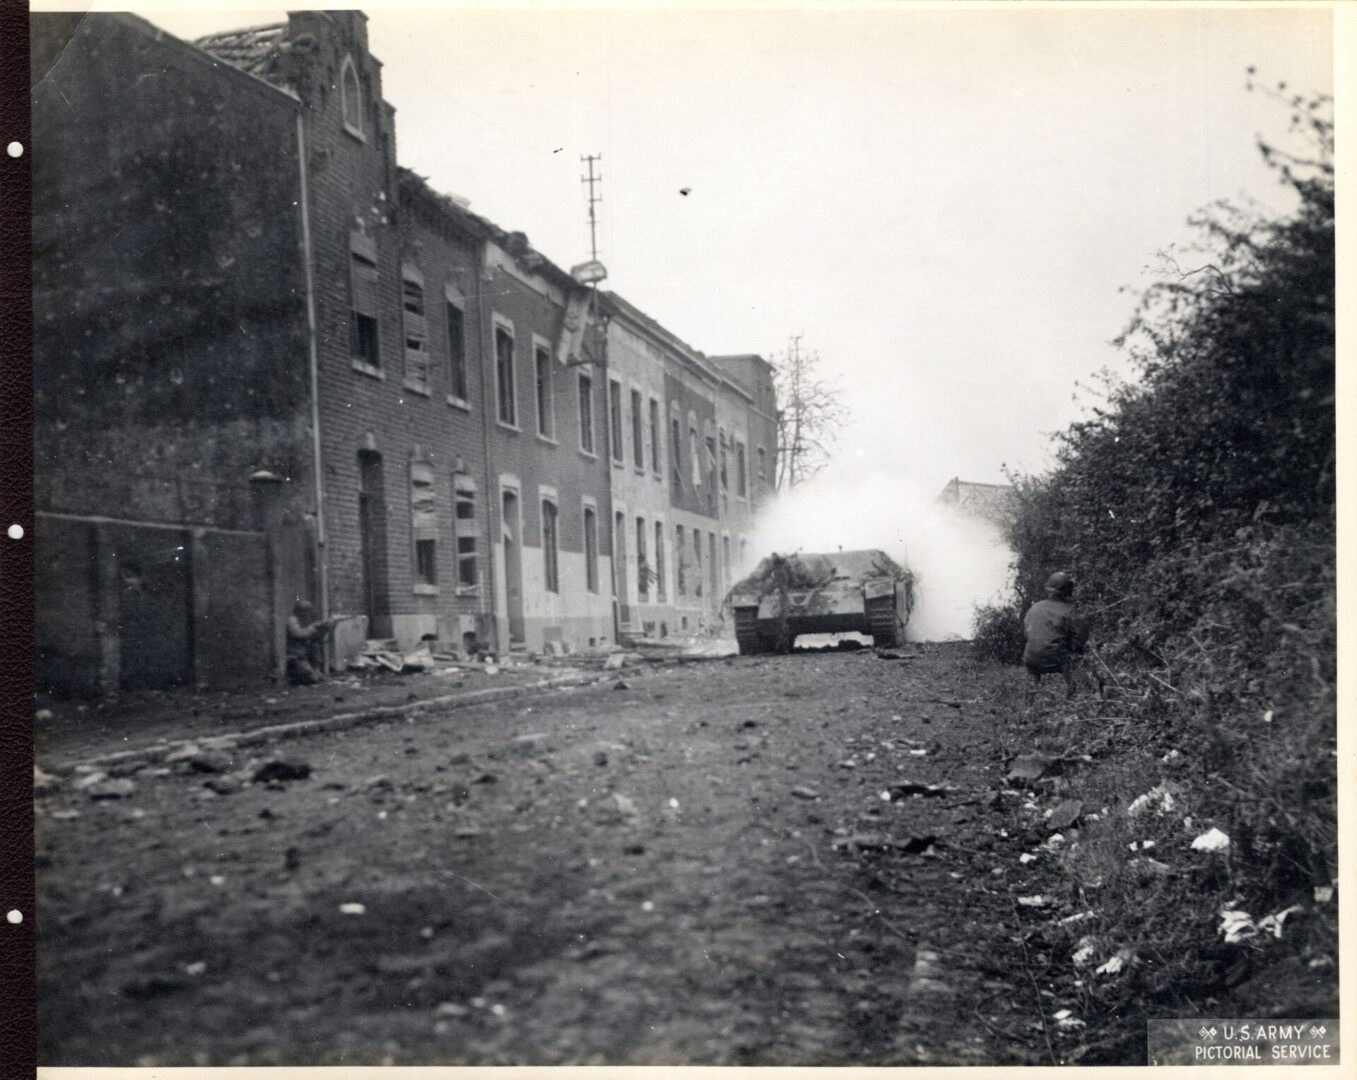 The town of Aachen in Germany destroyed by artillery attack